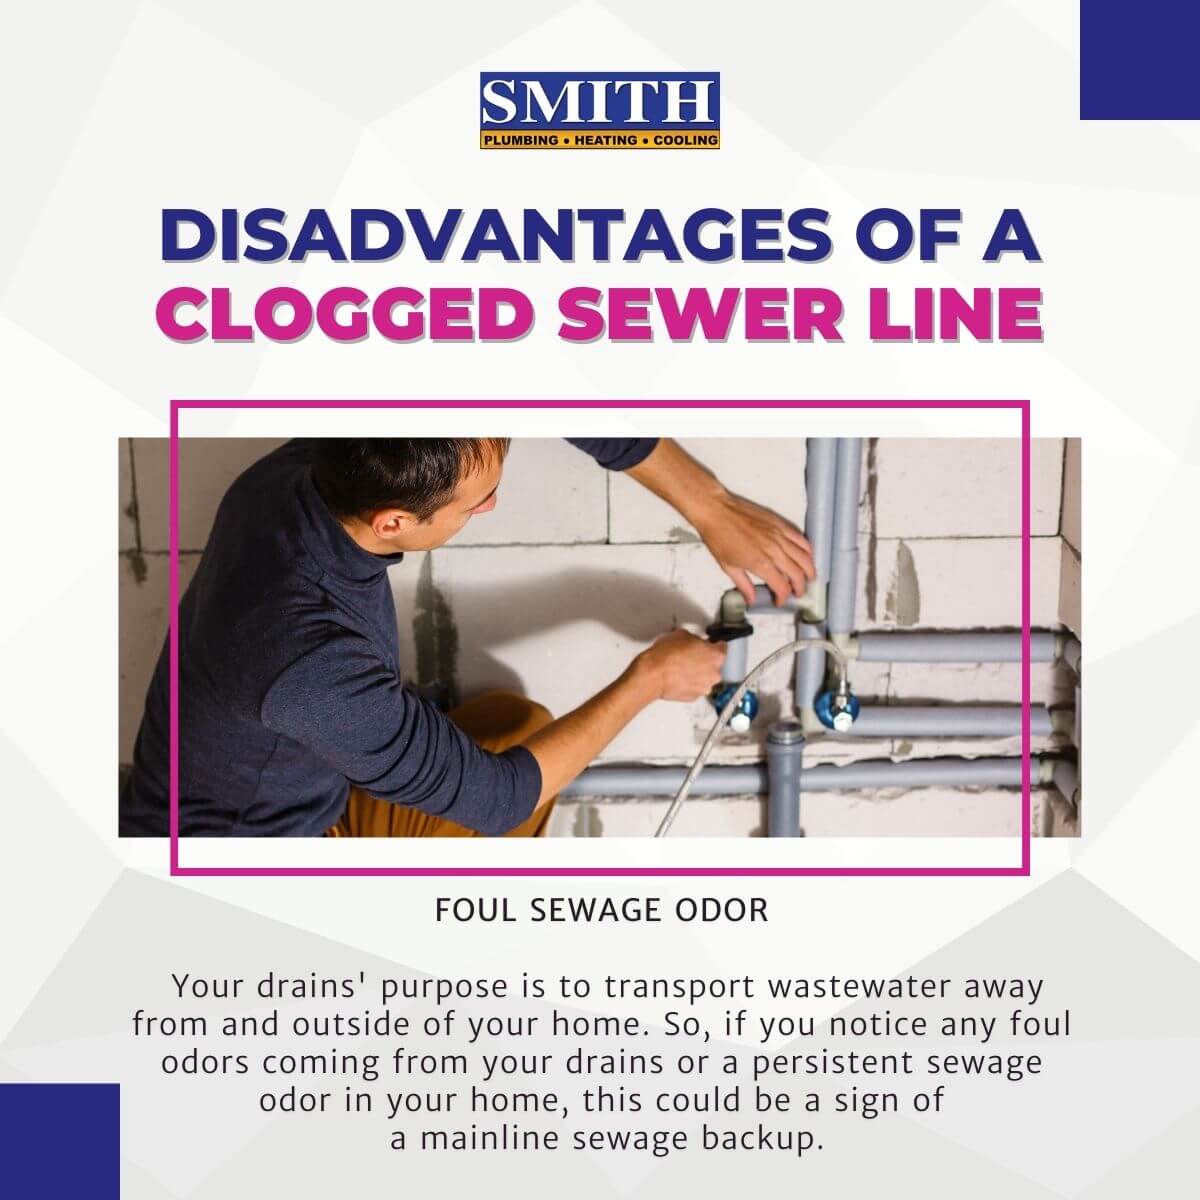 Disadvantages of a clogged sewer line page 4